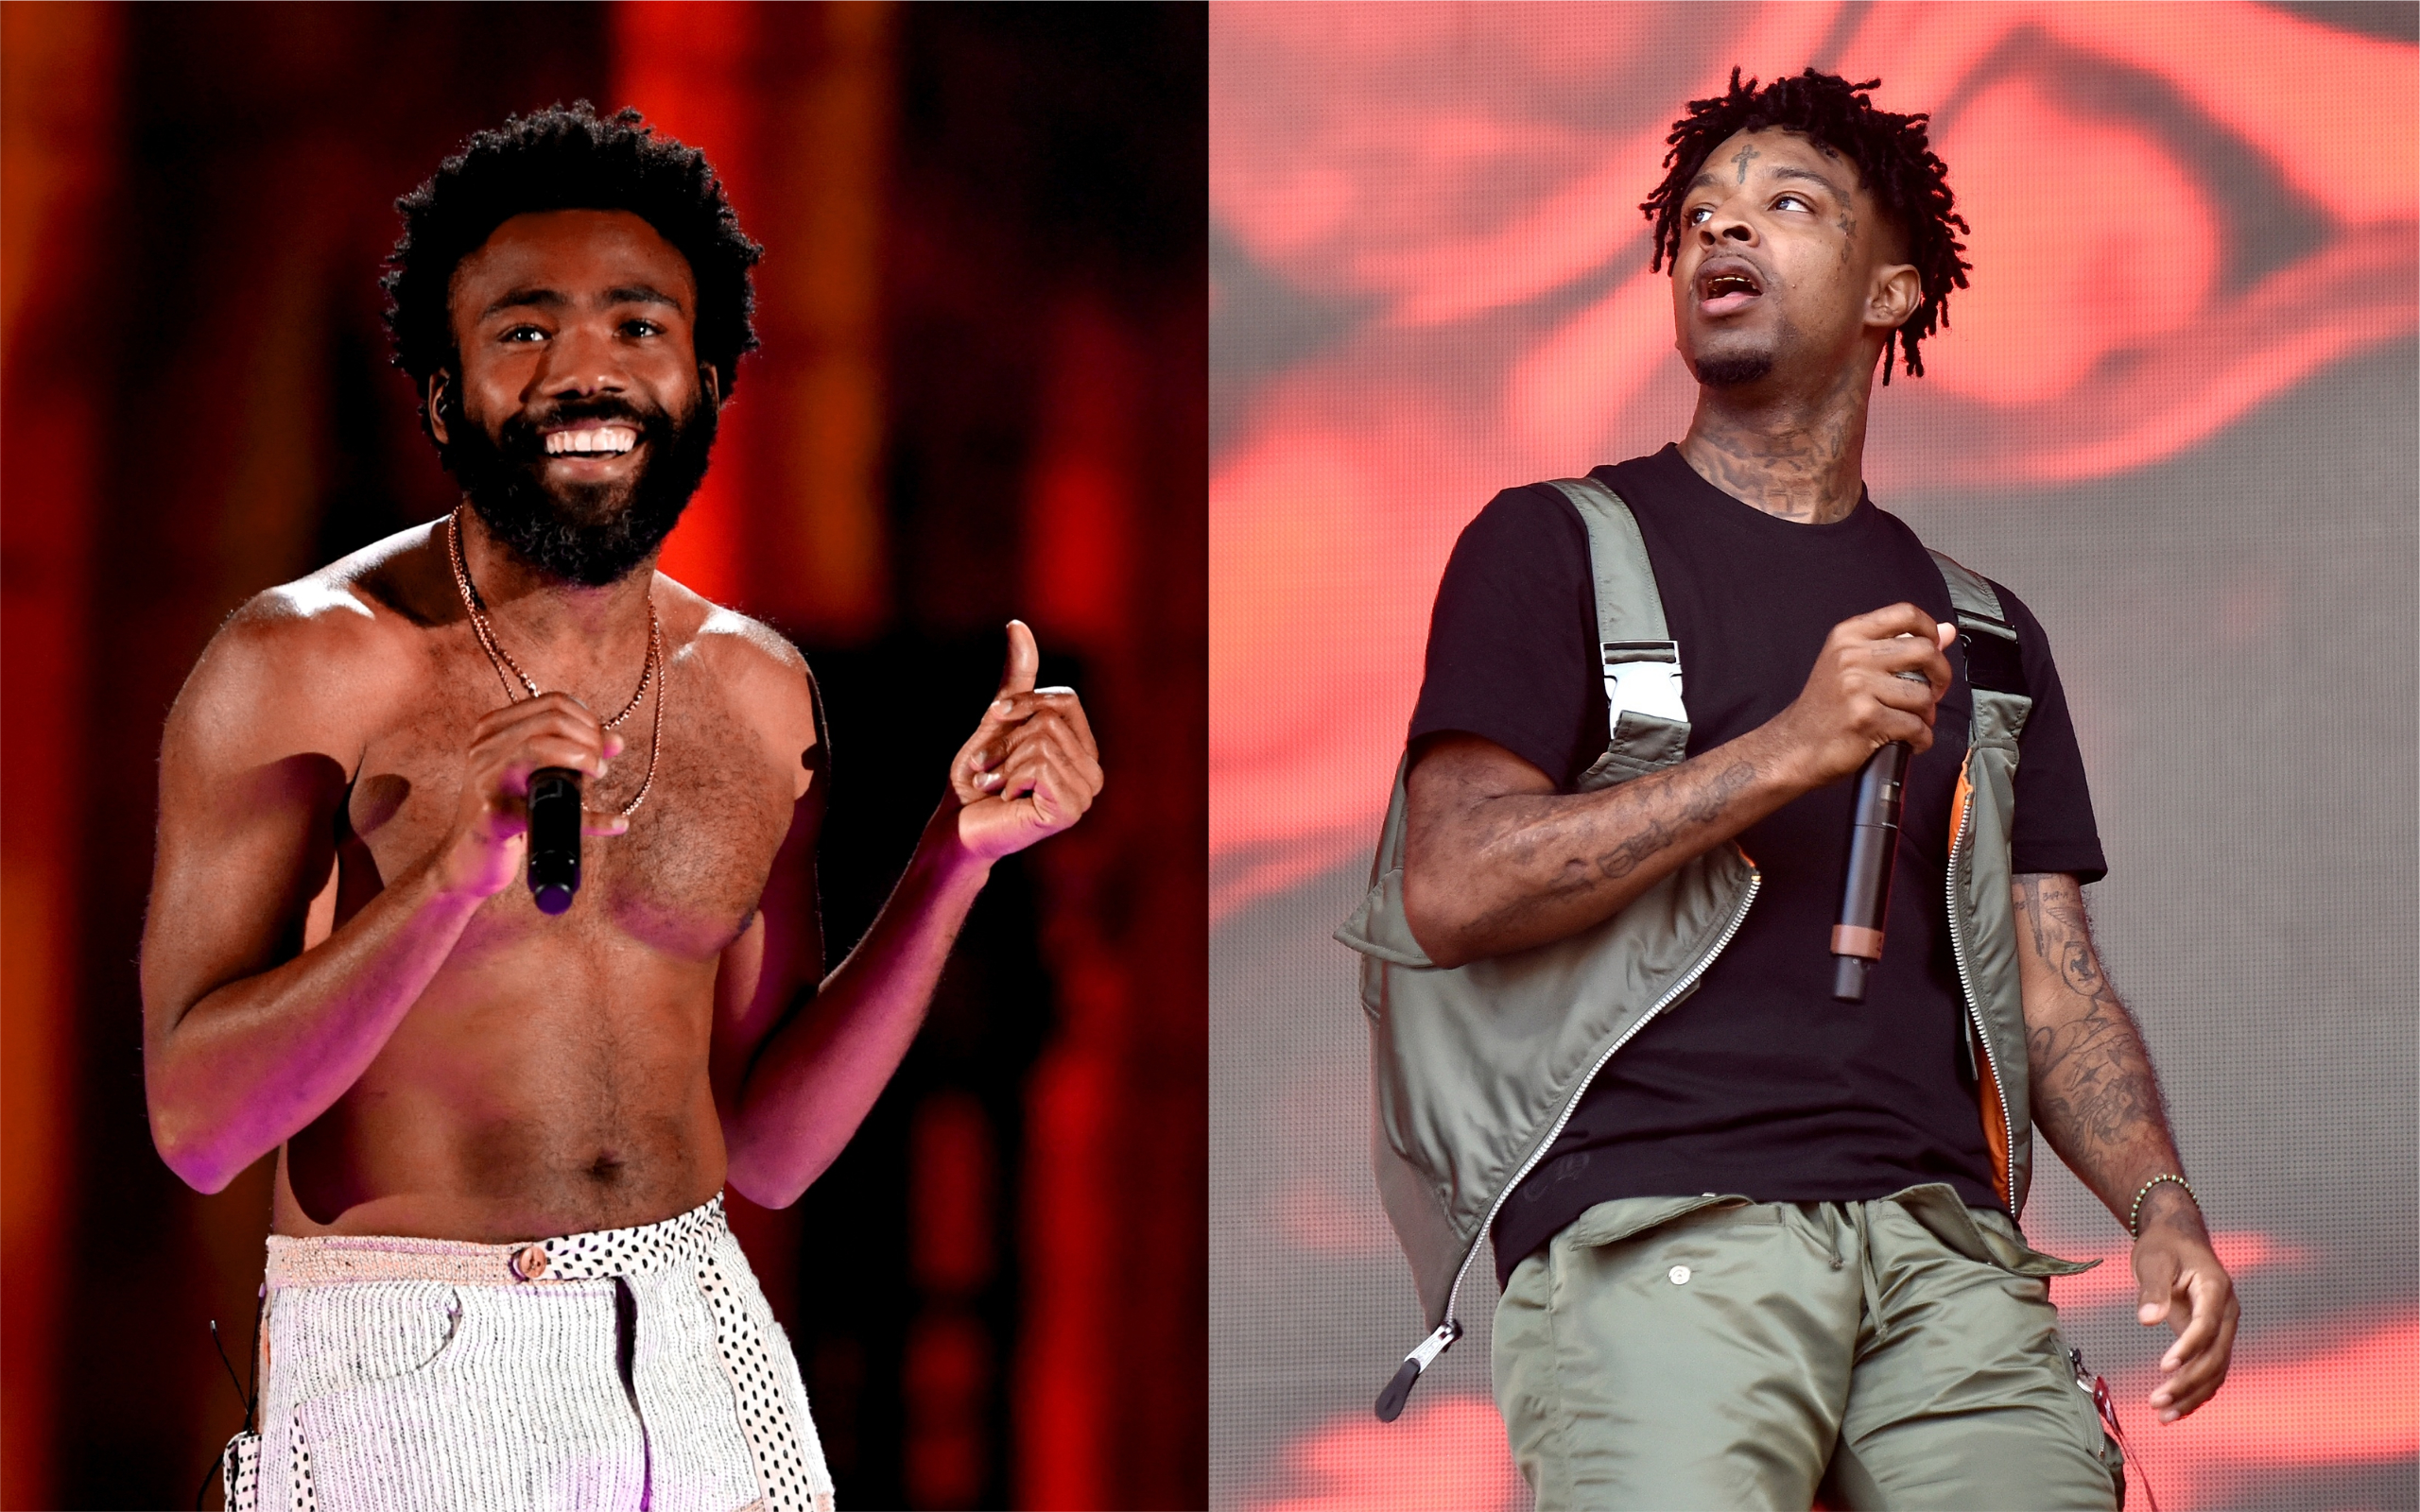 21 Savage & Childish Gambino Link Up For Monster Duet At Lollapalooza